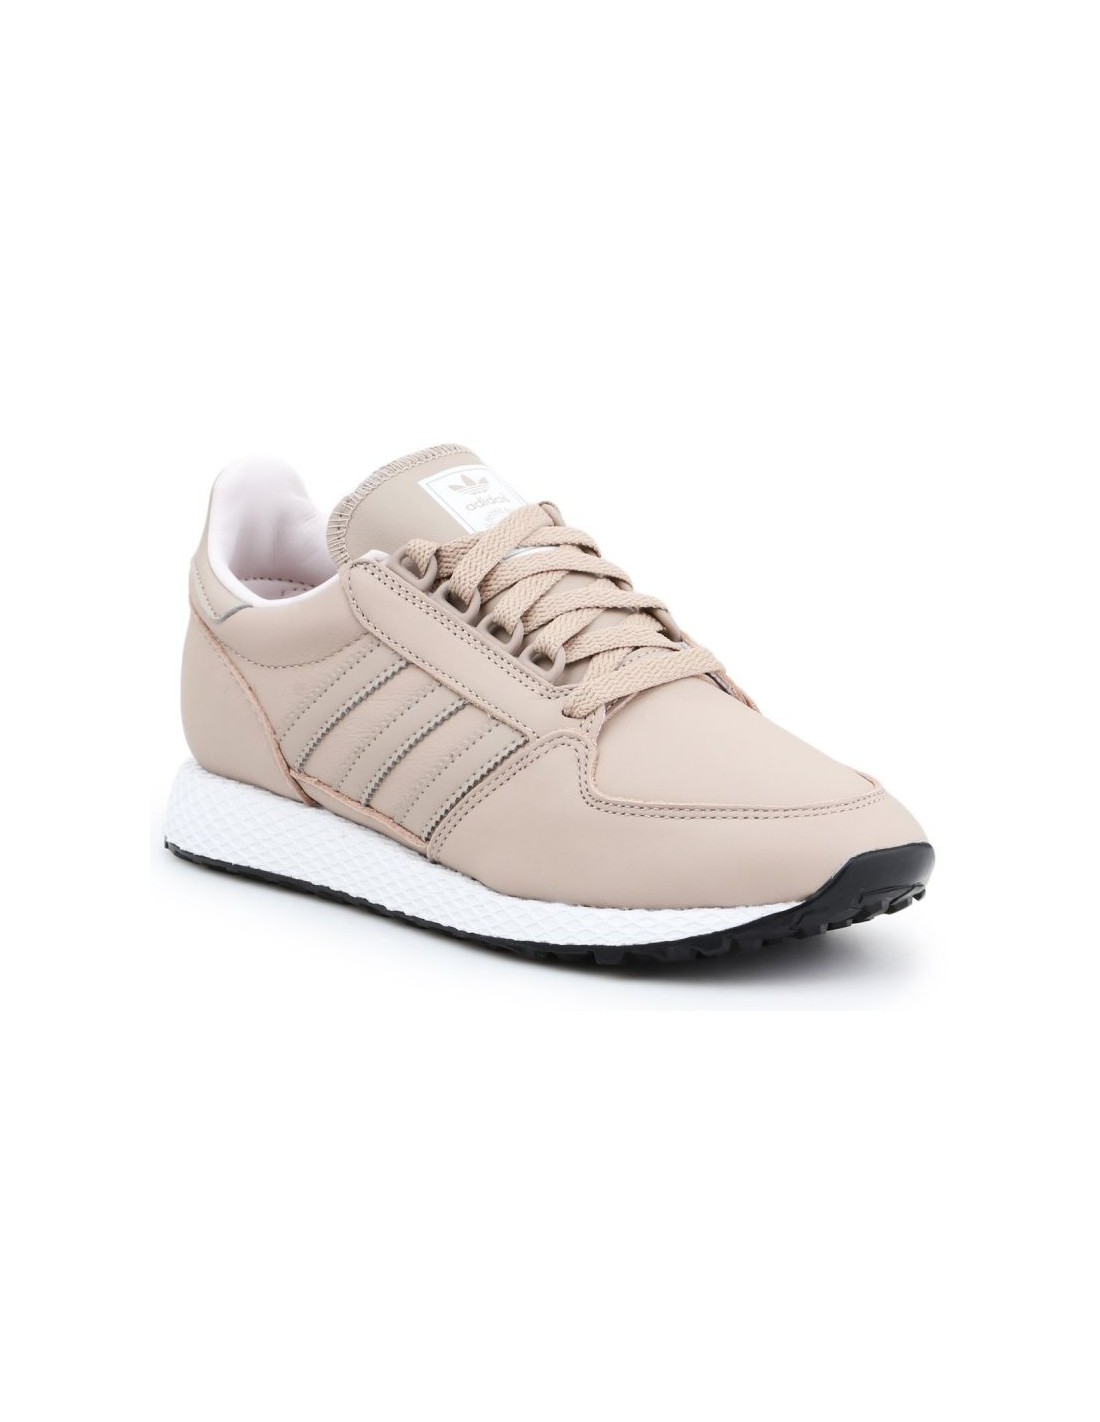 Terminologie dubbele Prooi Adidas Forest Grove W EE8967 shoes